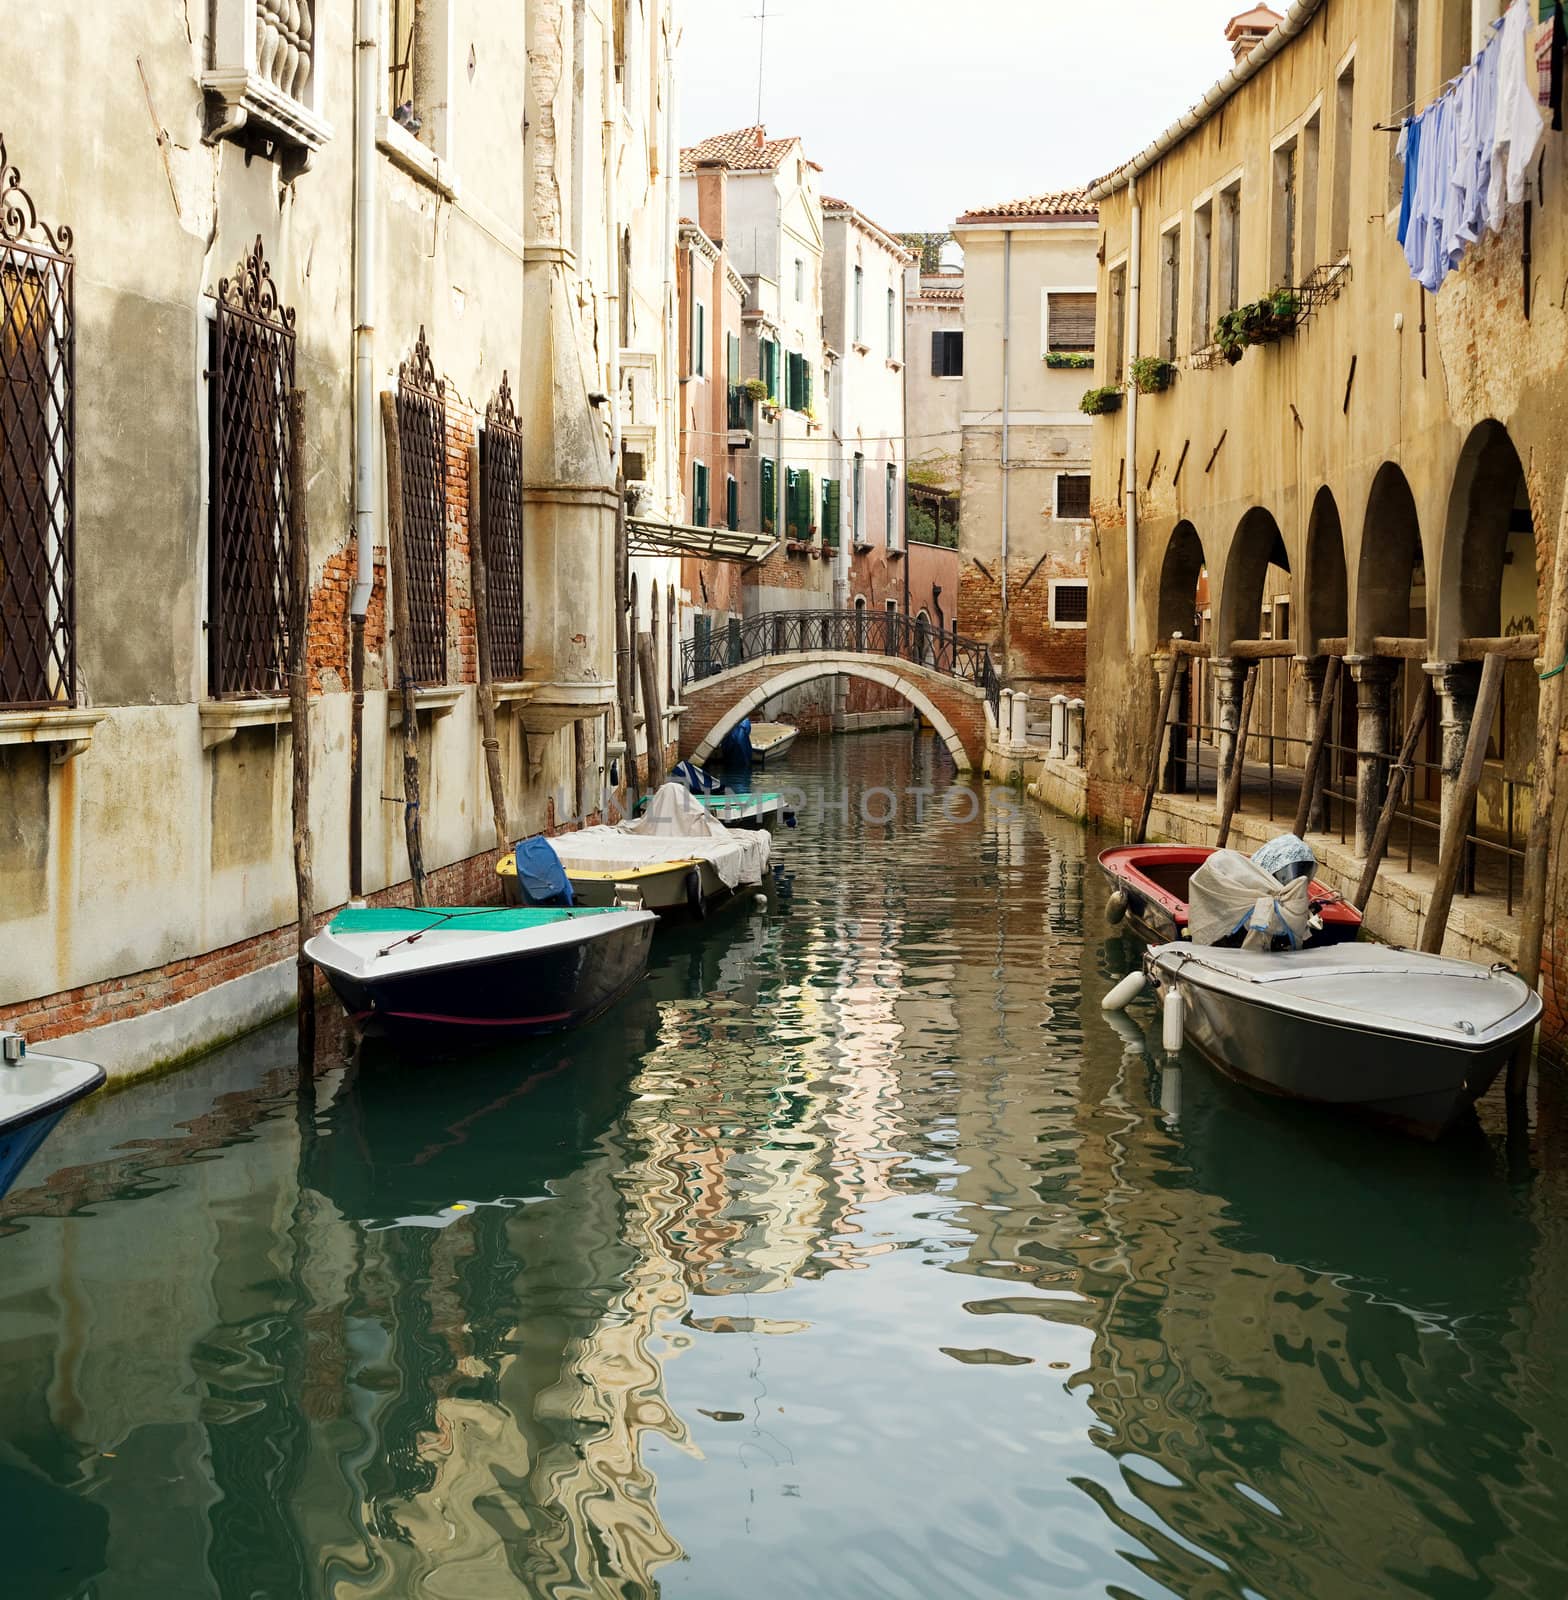 An image of a narrow canal in Venice